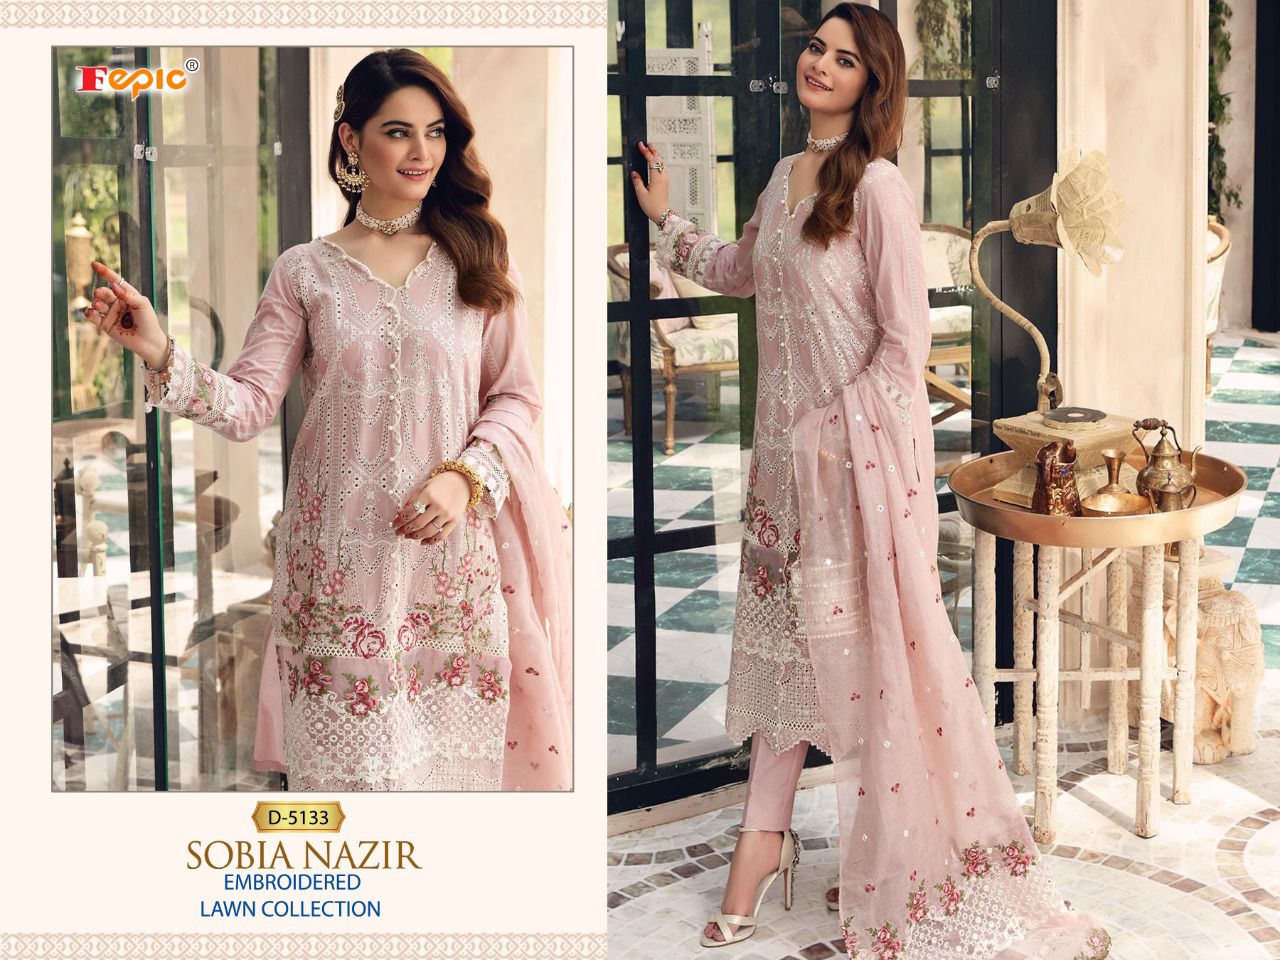 Fepic Rosemeen Sobia Nazir Lawn Collection 5133